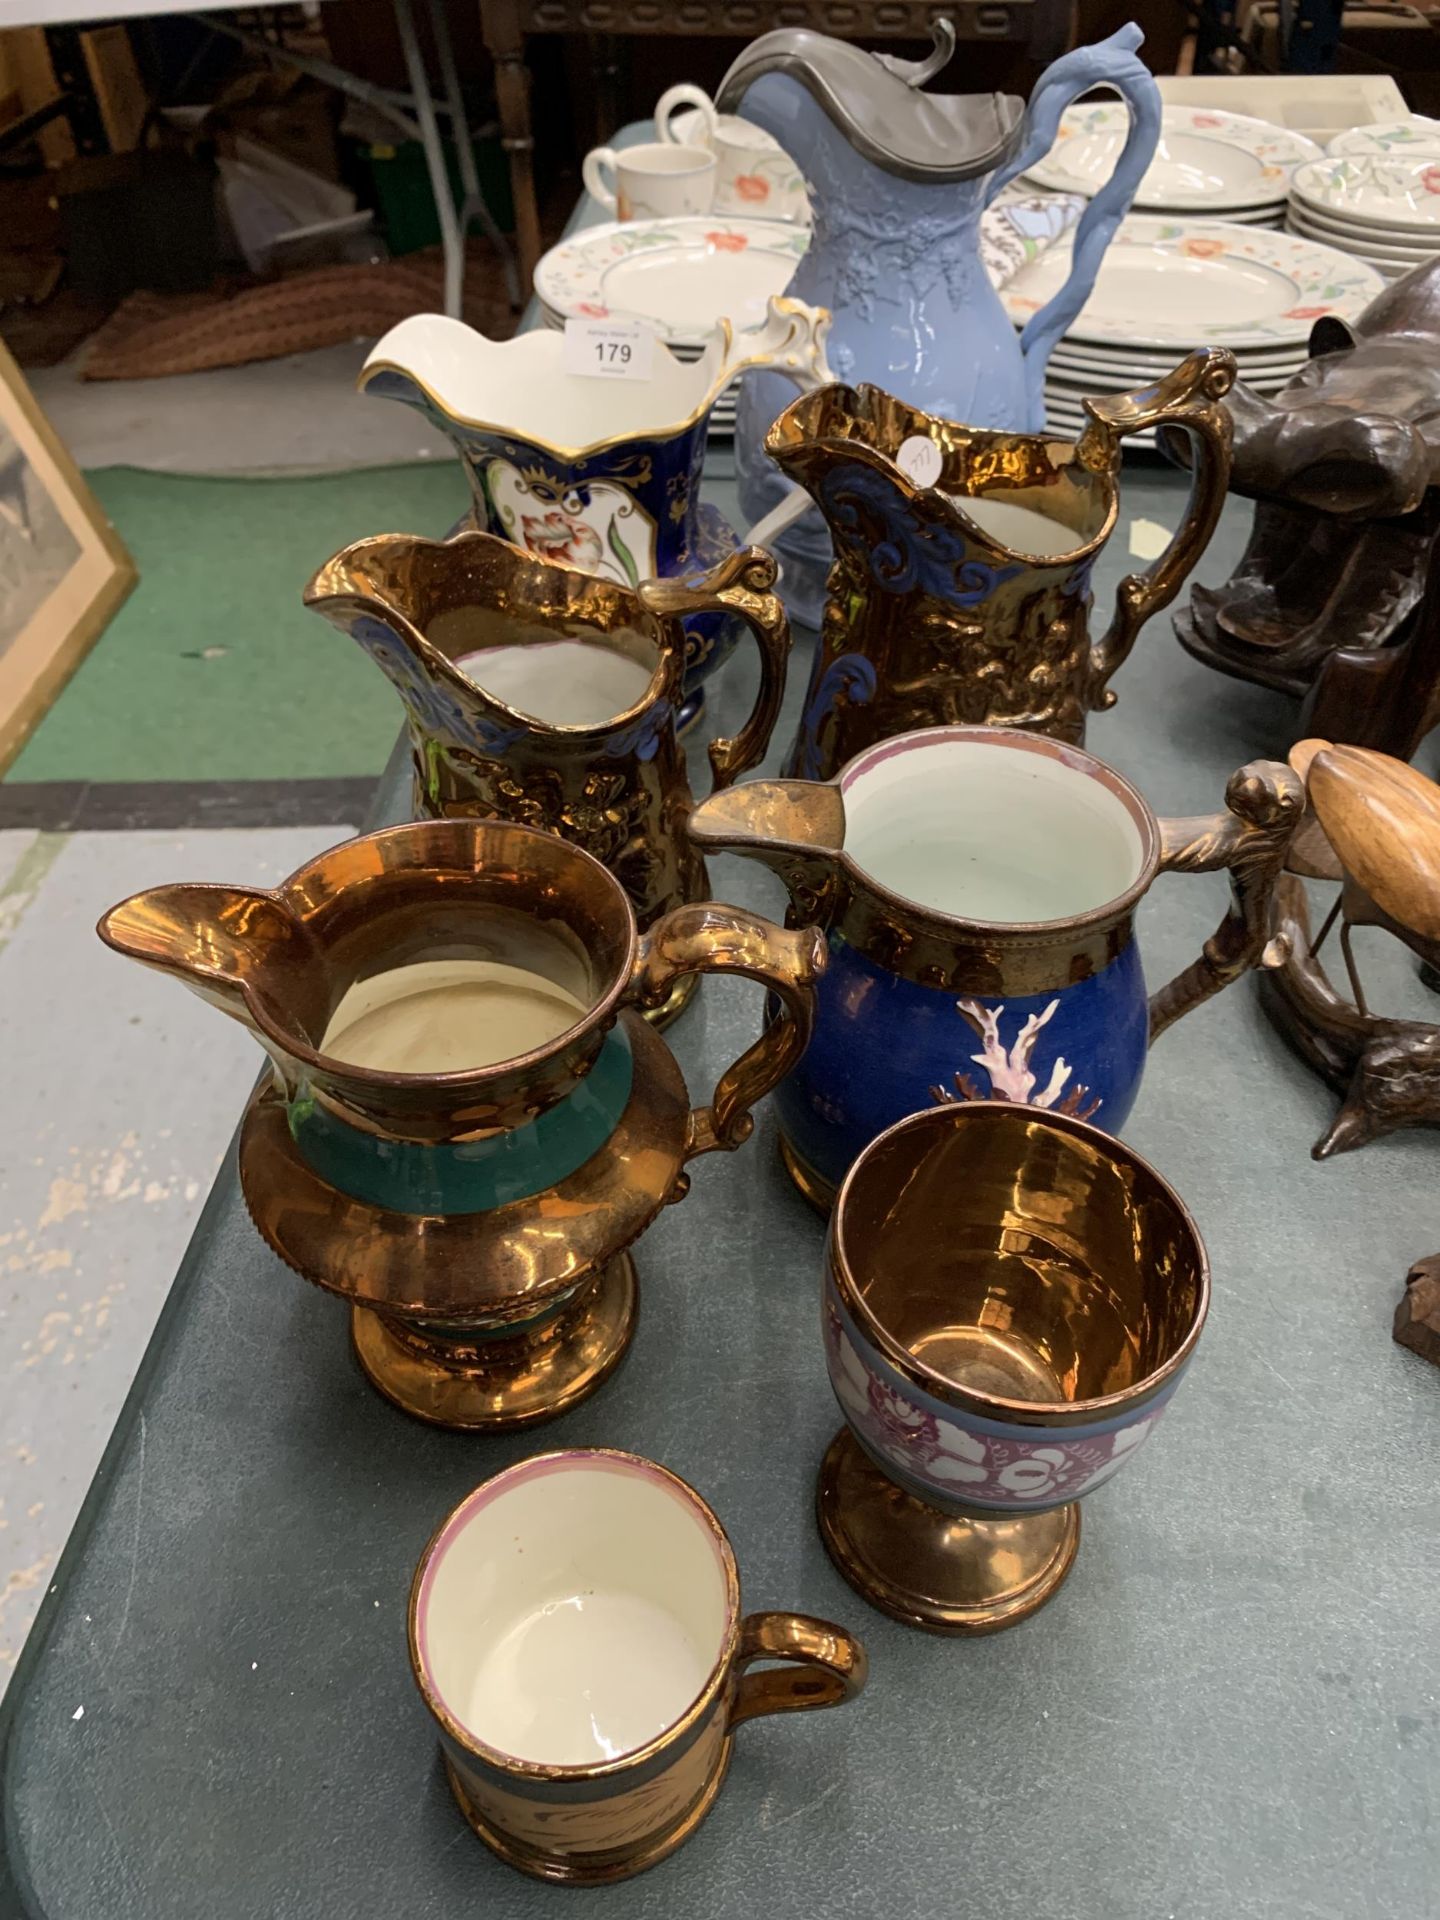 SIX VINTAGE JUGS, A GOBLET AND A MUG TO INCLUDE A WATER JUG WITH CHERUBS AND PEWTER LID, COPPER